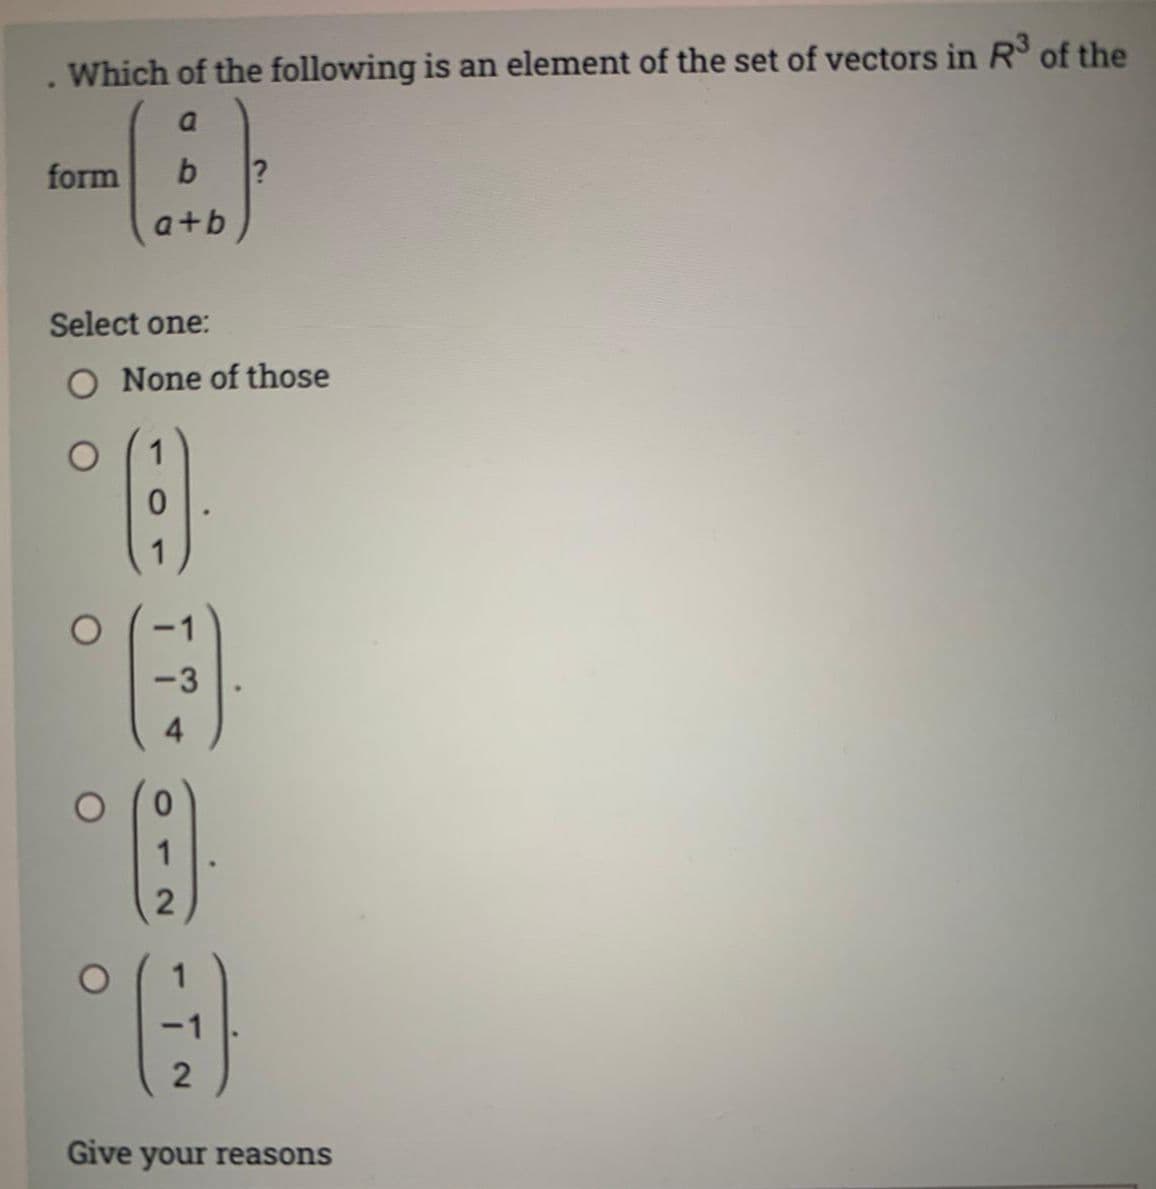 Which of the following is an element of the set of vectors in R³ of the
a
b ?
form
a+b
Select one:
O None of those
2
(9)
2
Give your reasons